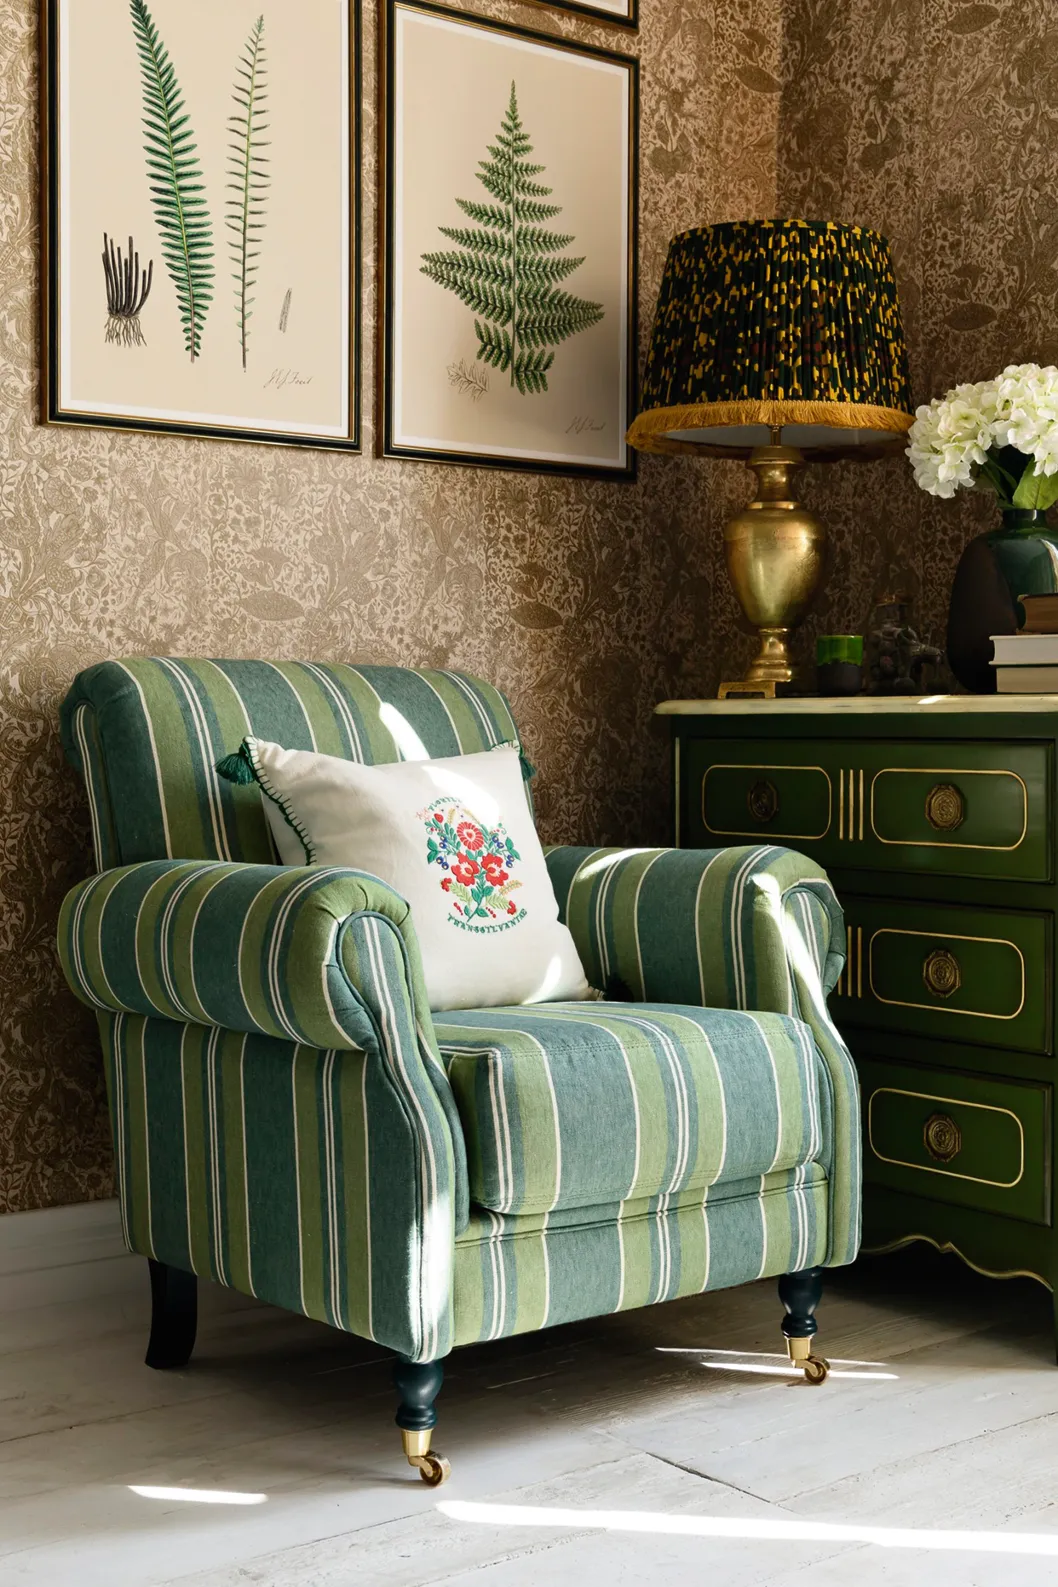 add a comfortable bedroom chair in which to curl up and read a book. Kingston armchair, £1,500, Mind the Gap